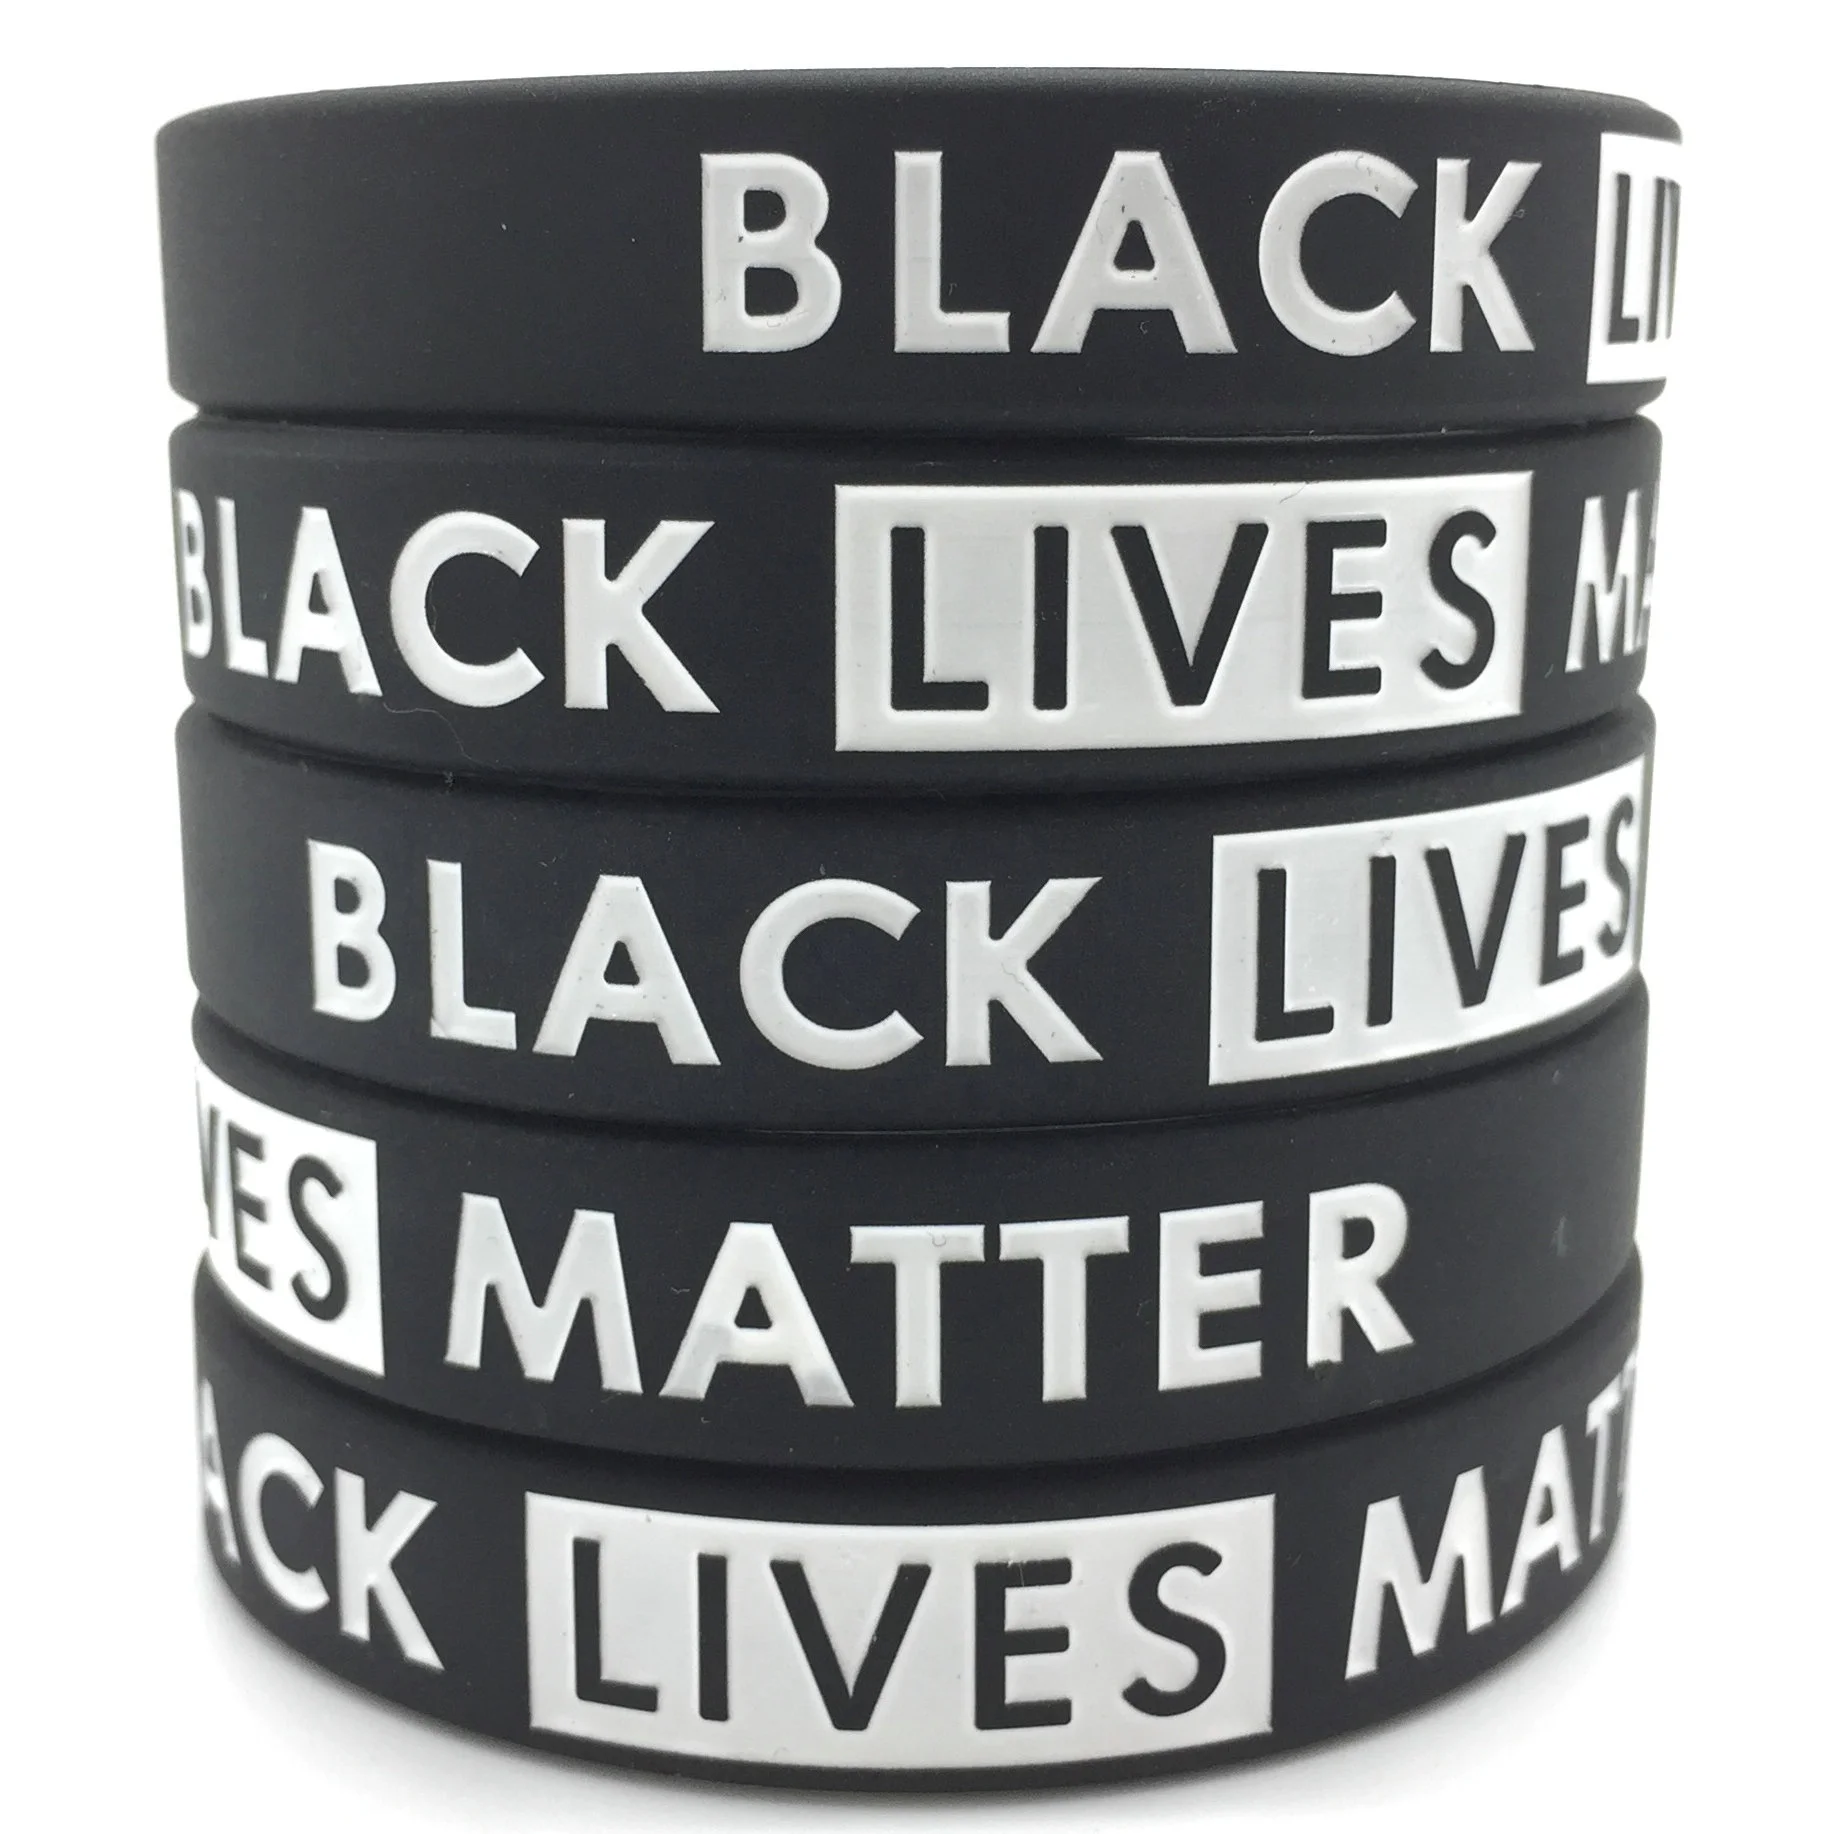 

Black Lives Matter Silicone Wristband I Can't Breathe Wrist Band Rubber Bracelet & Bangles For Men Women, Any pantone colors